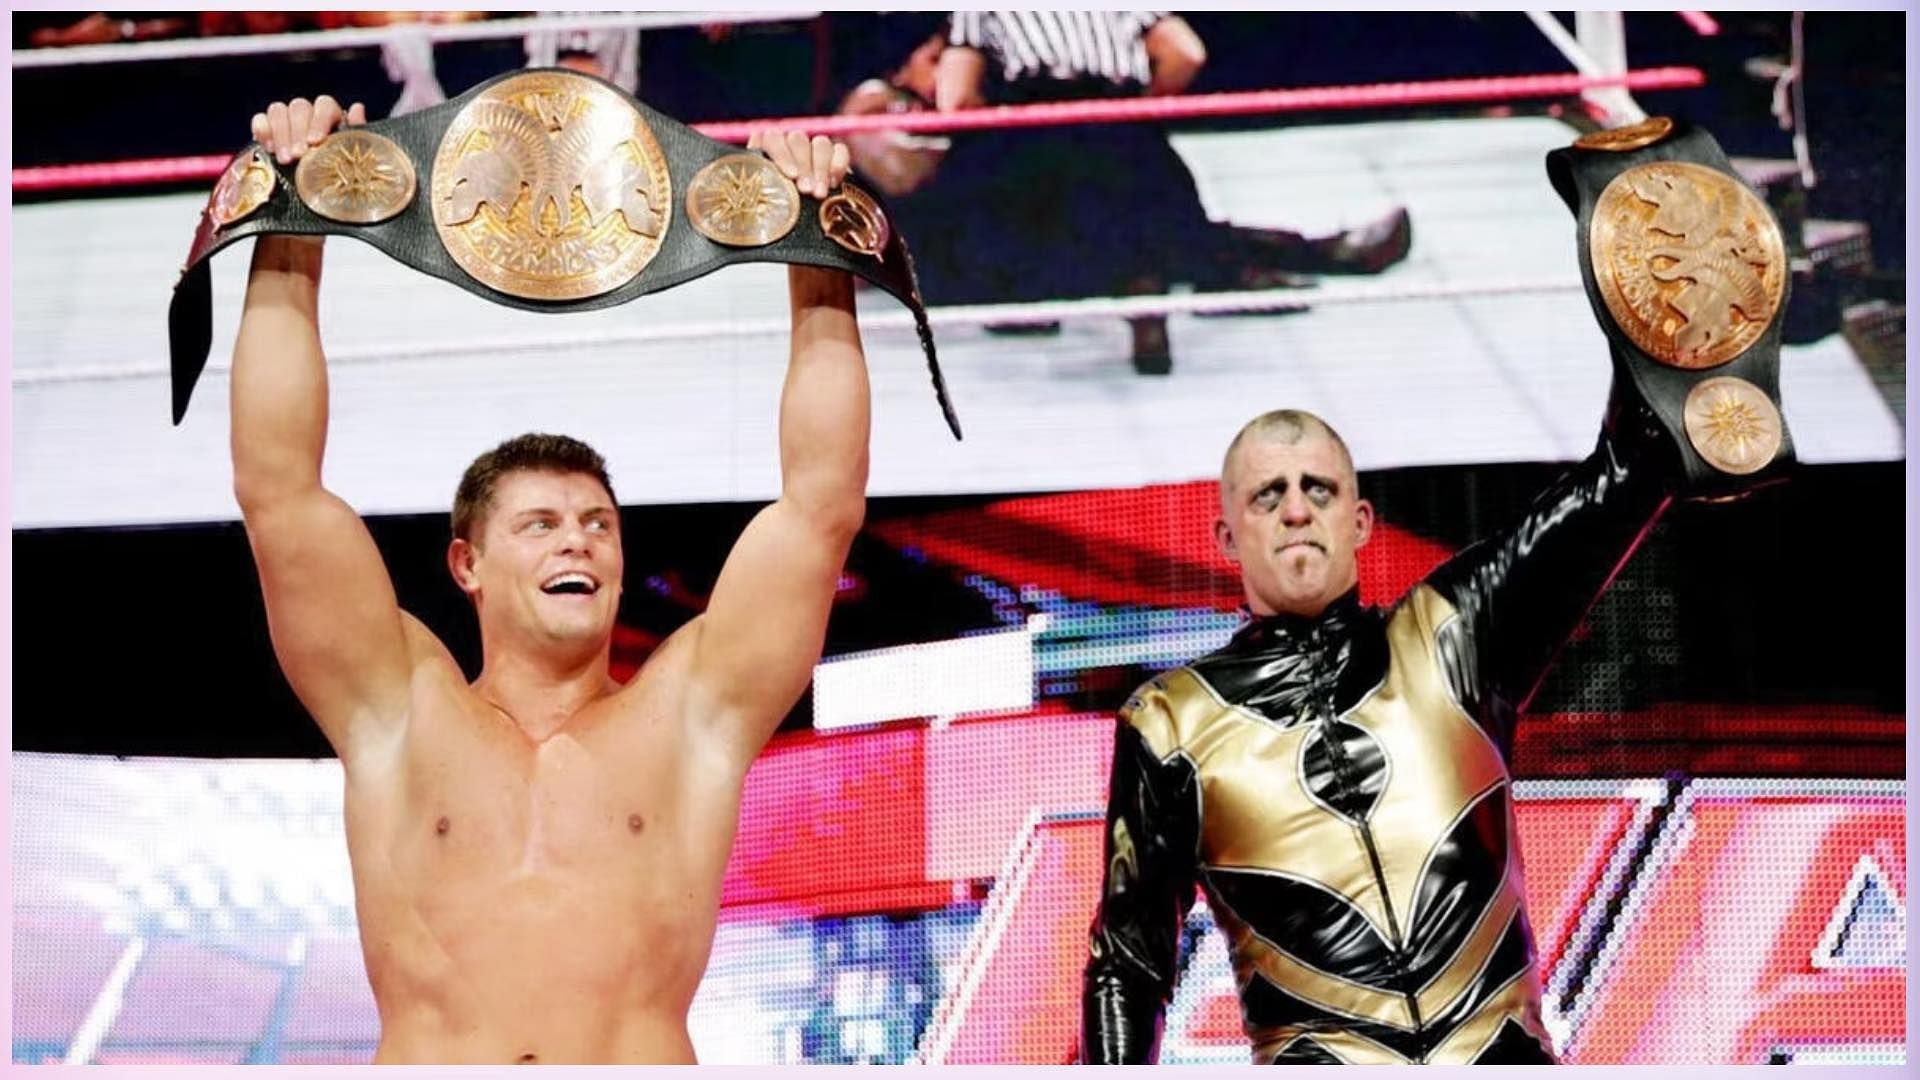 Cody Rhodes and Dustin Rhodes are sons of legendary star Dusty Rhodes